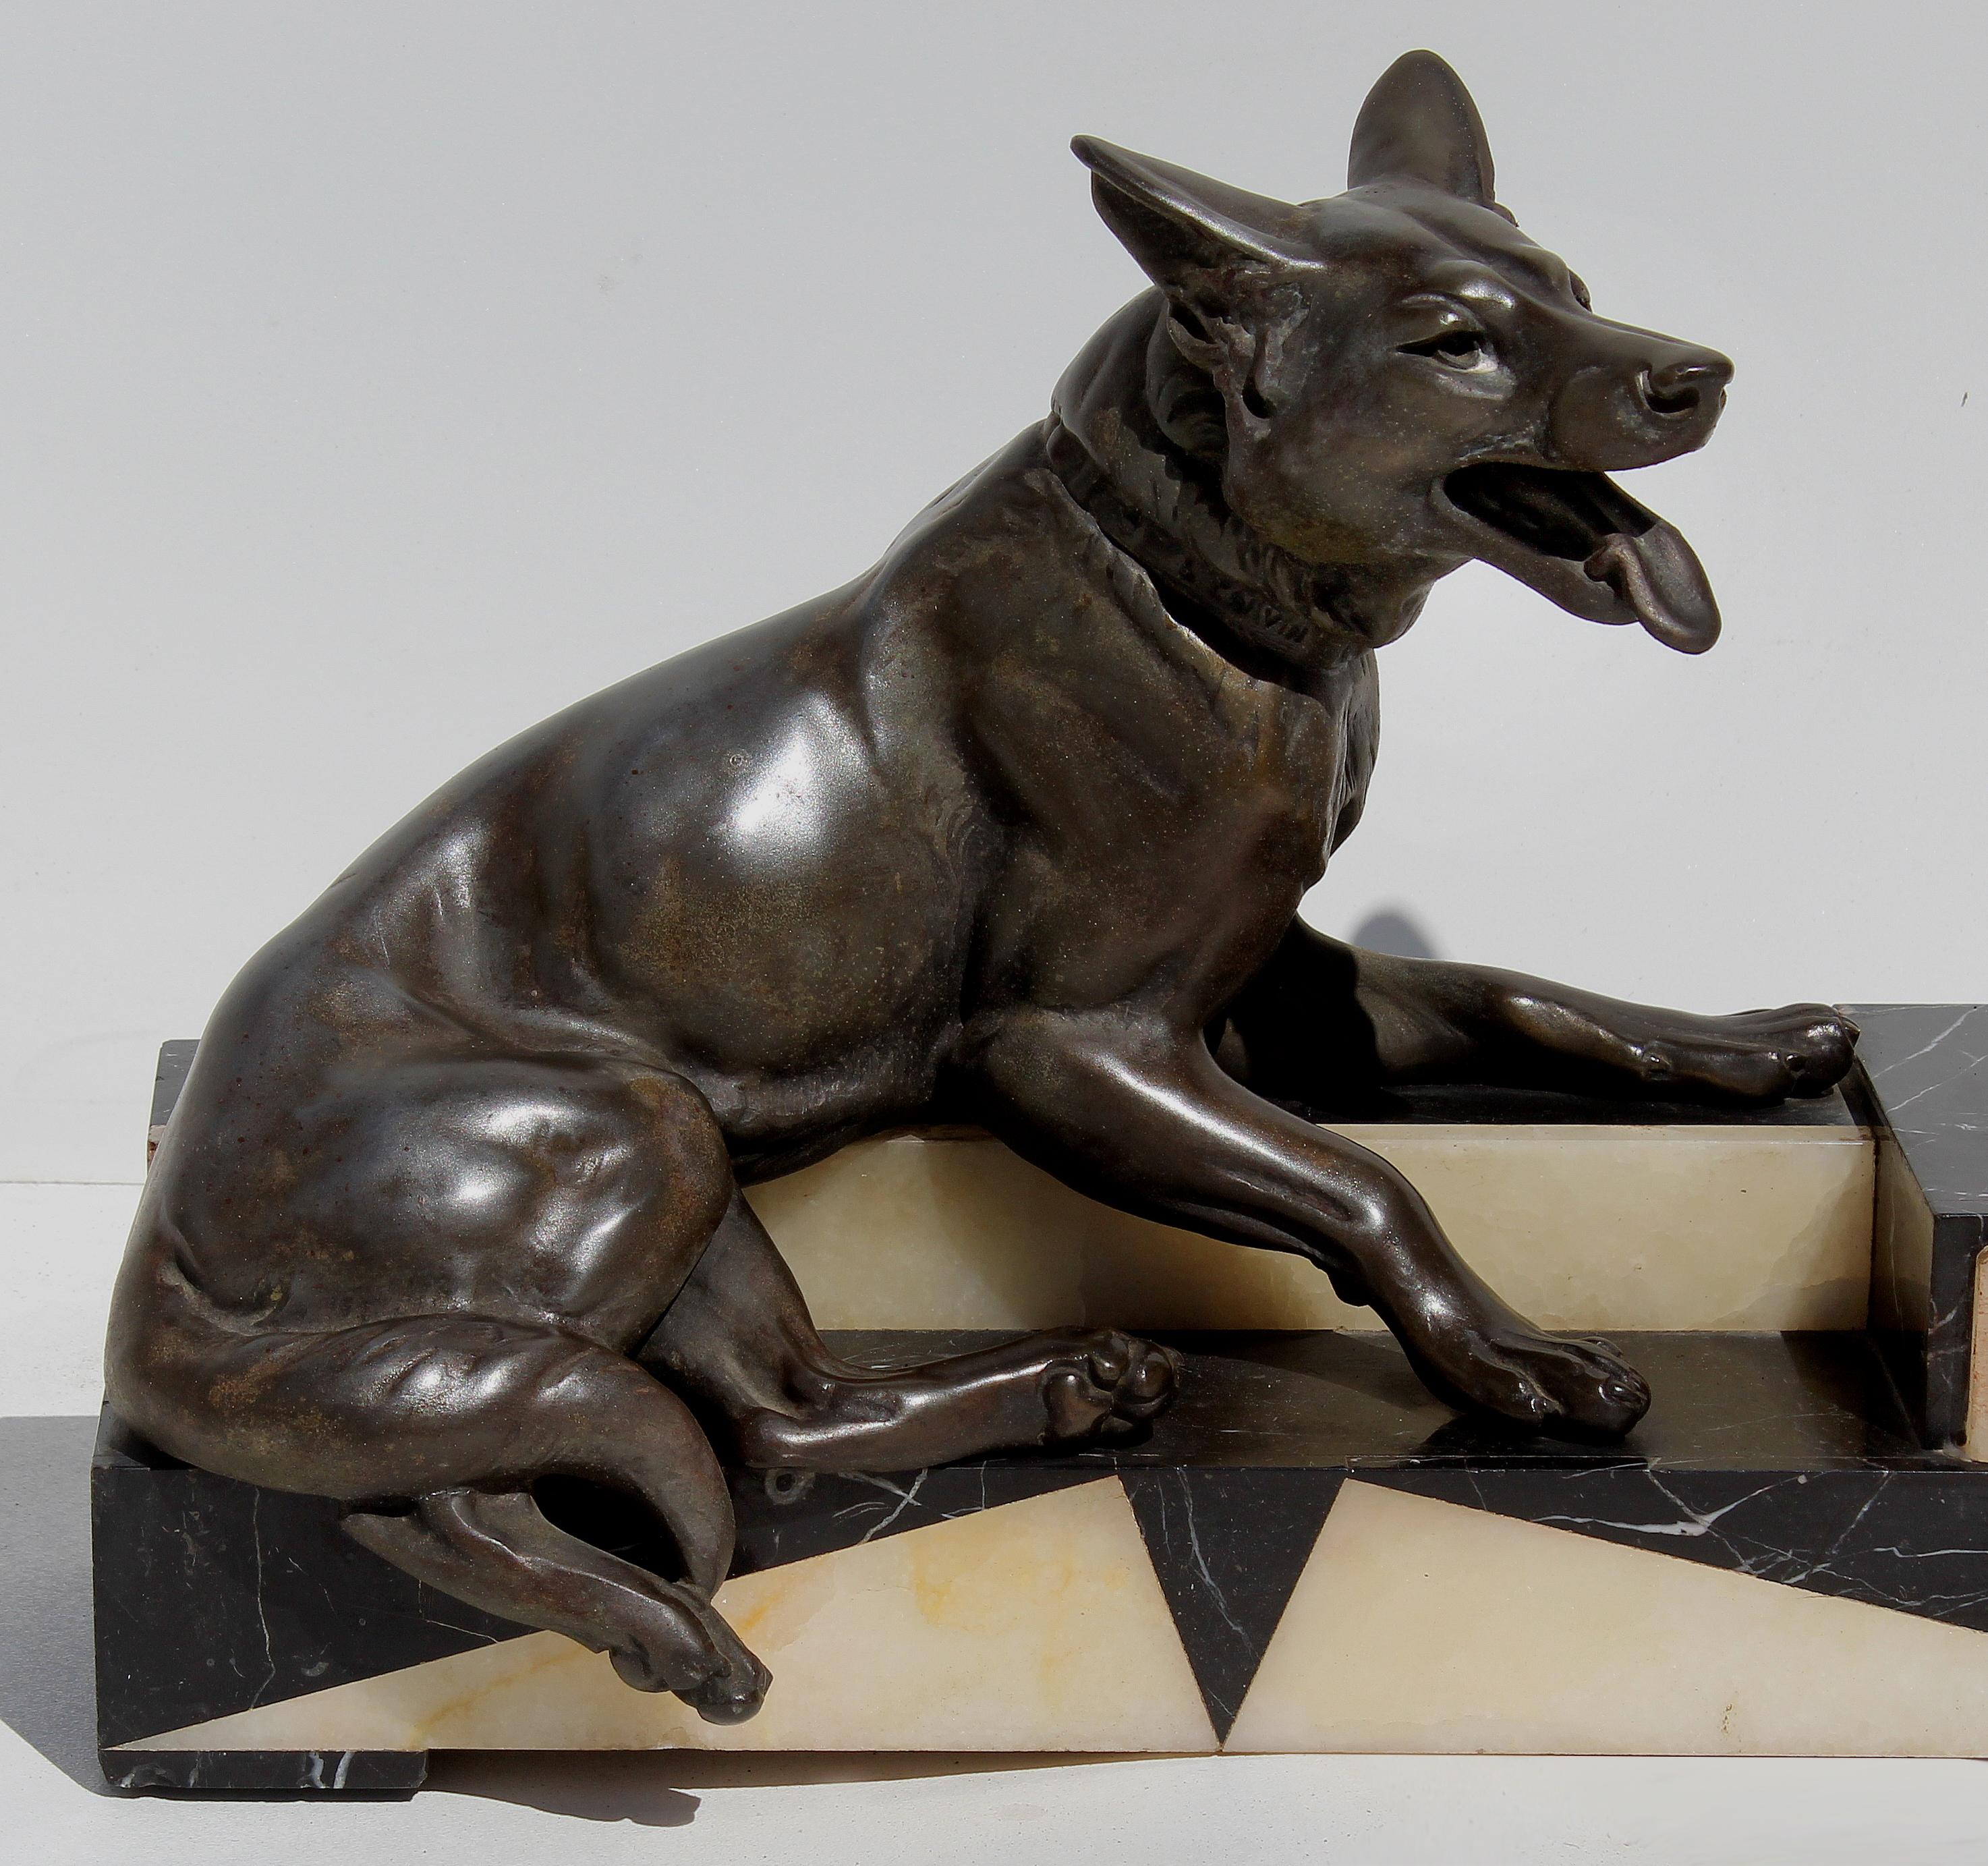 Louis-Albert Carvin Dog Animalier Art Deco Sculpture in Marble and Bronze 

Offered for sale is a large bronze sculpture of two German shepherds mounted on an Art Deco stylized marble base by Louis-Albert Carvin (French, 1875-1951). Engraved